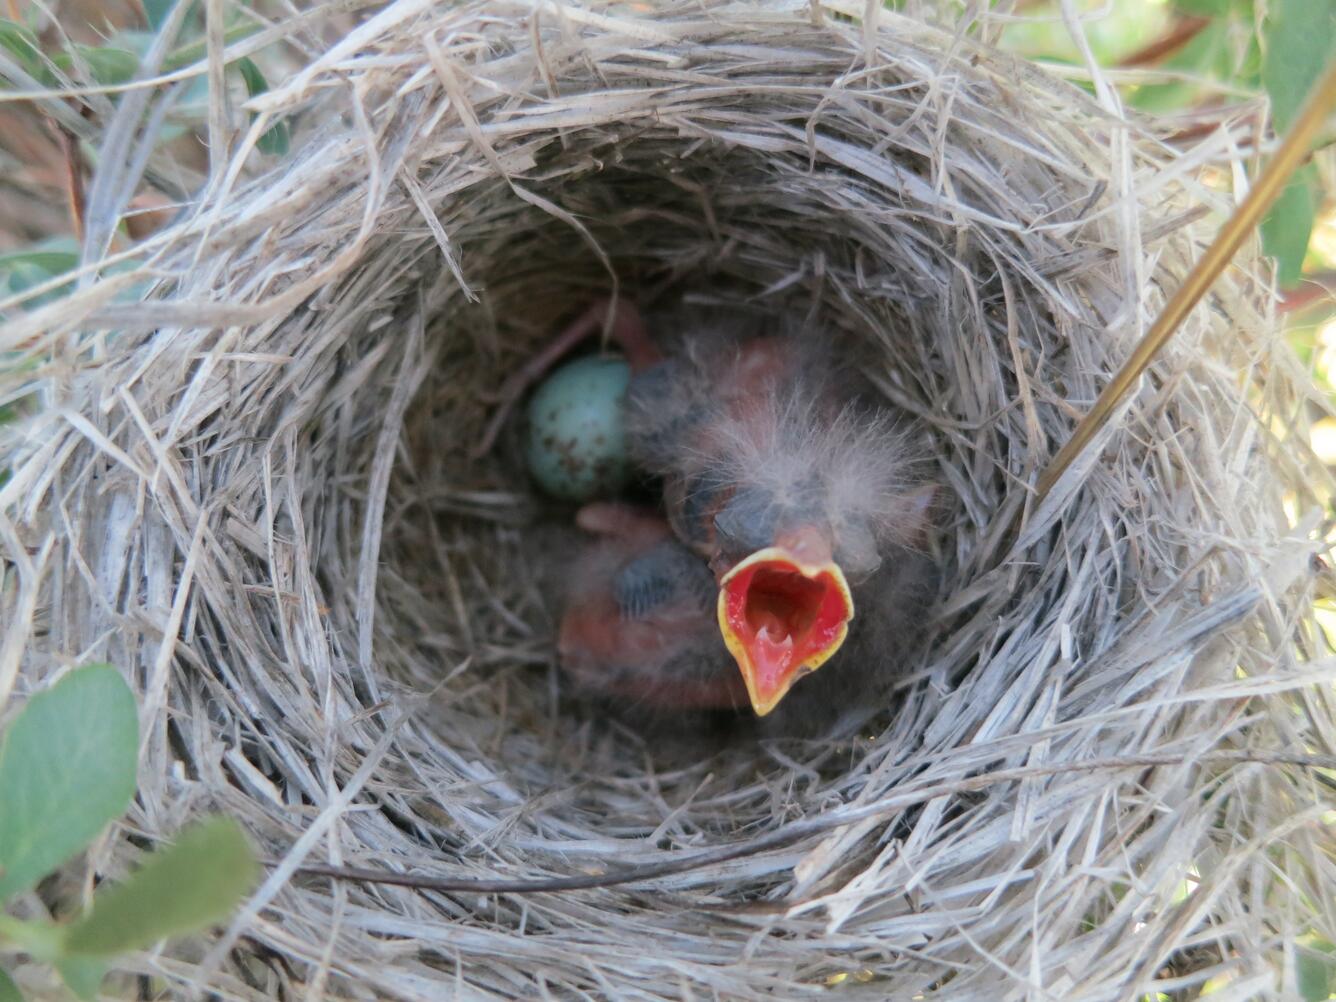 Image: Brewer's Sparrow Chicks